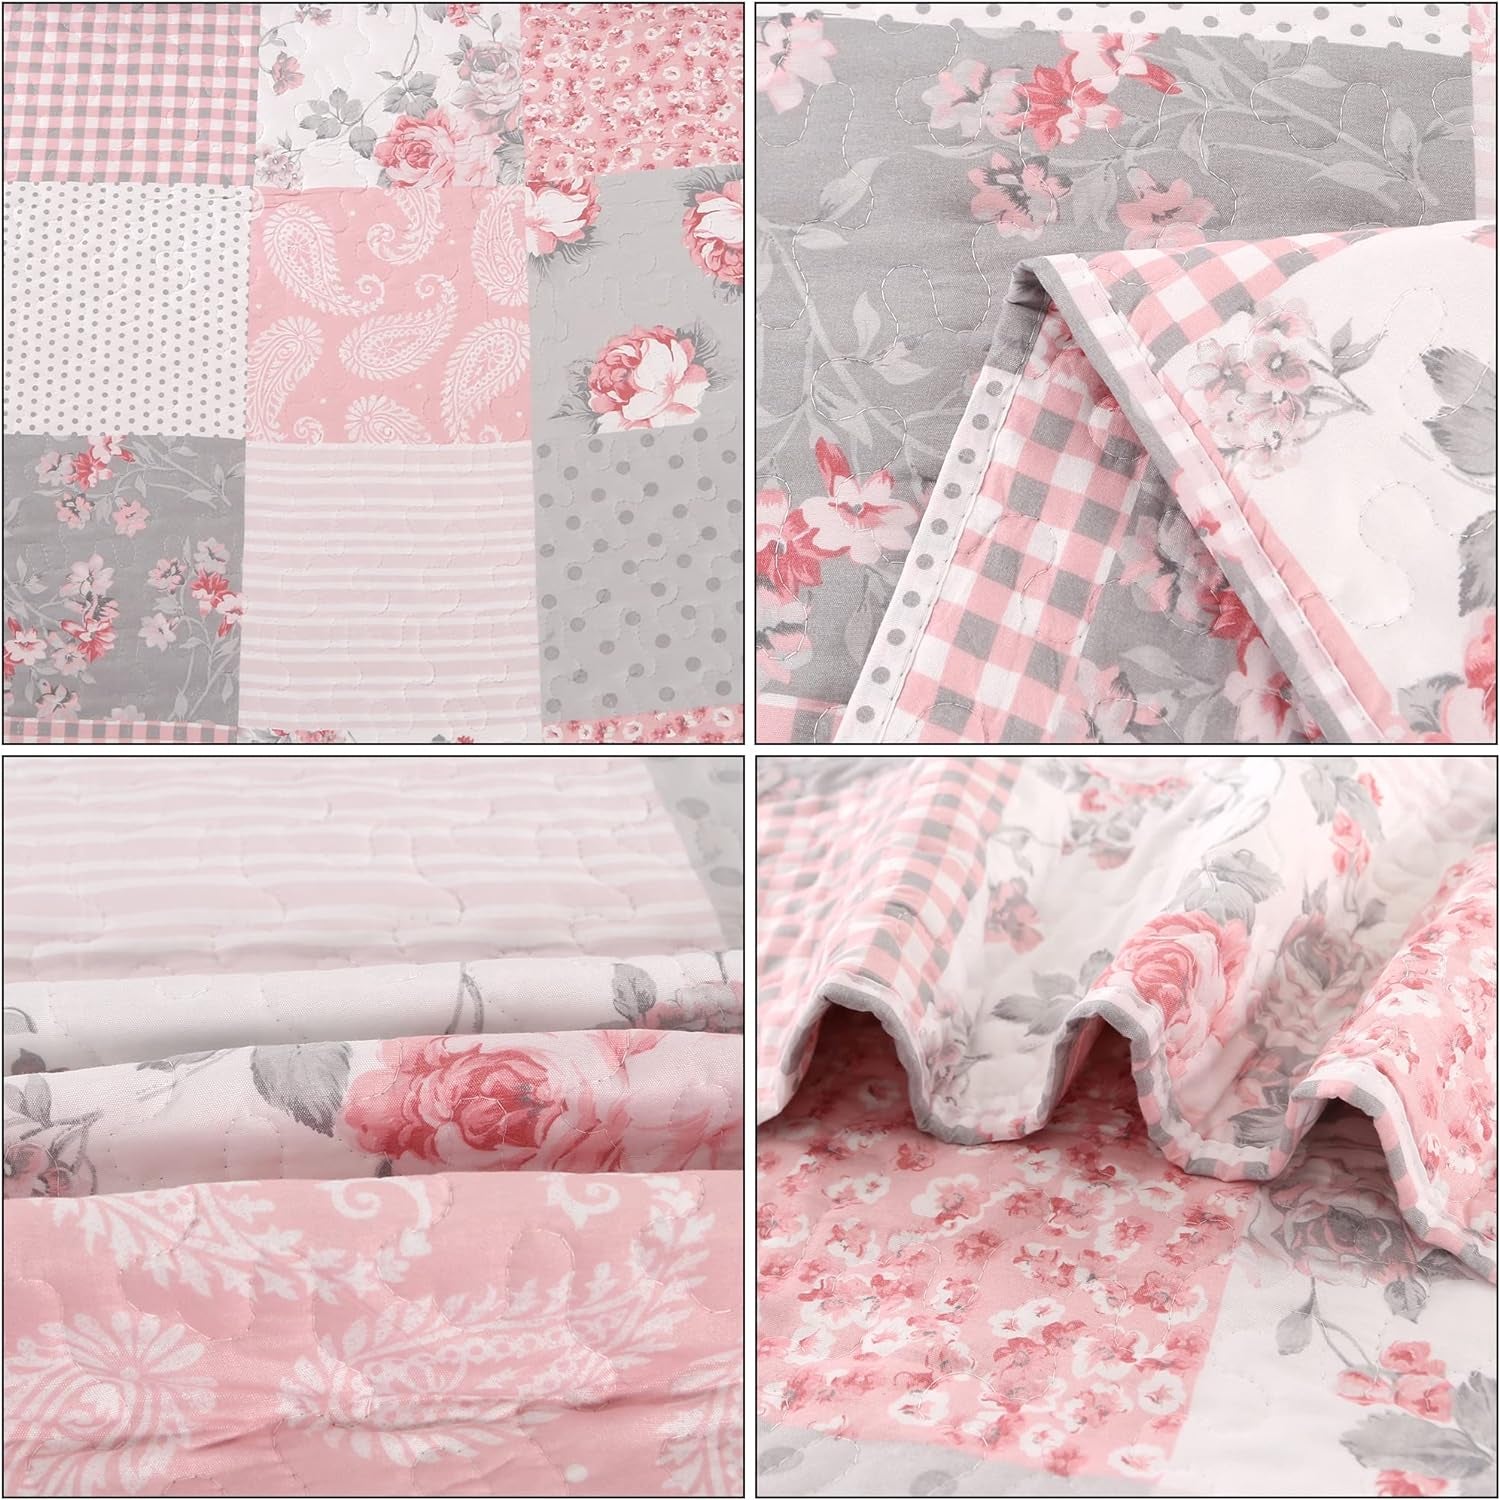 Pink Plaid Patchwork Quilt Set Full Queen Size Floral Rversible Quilted Bedspread Coverlet Set 3-Piece Grey Grid Flowers Lightweight Comforter Bedding Set Bed Sheet Cover Blanket with 2 Pillow Shams